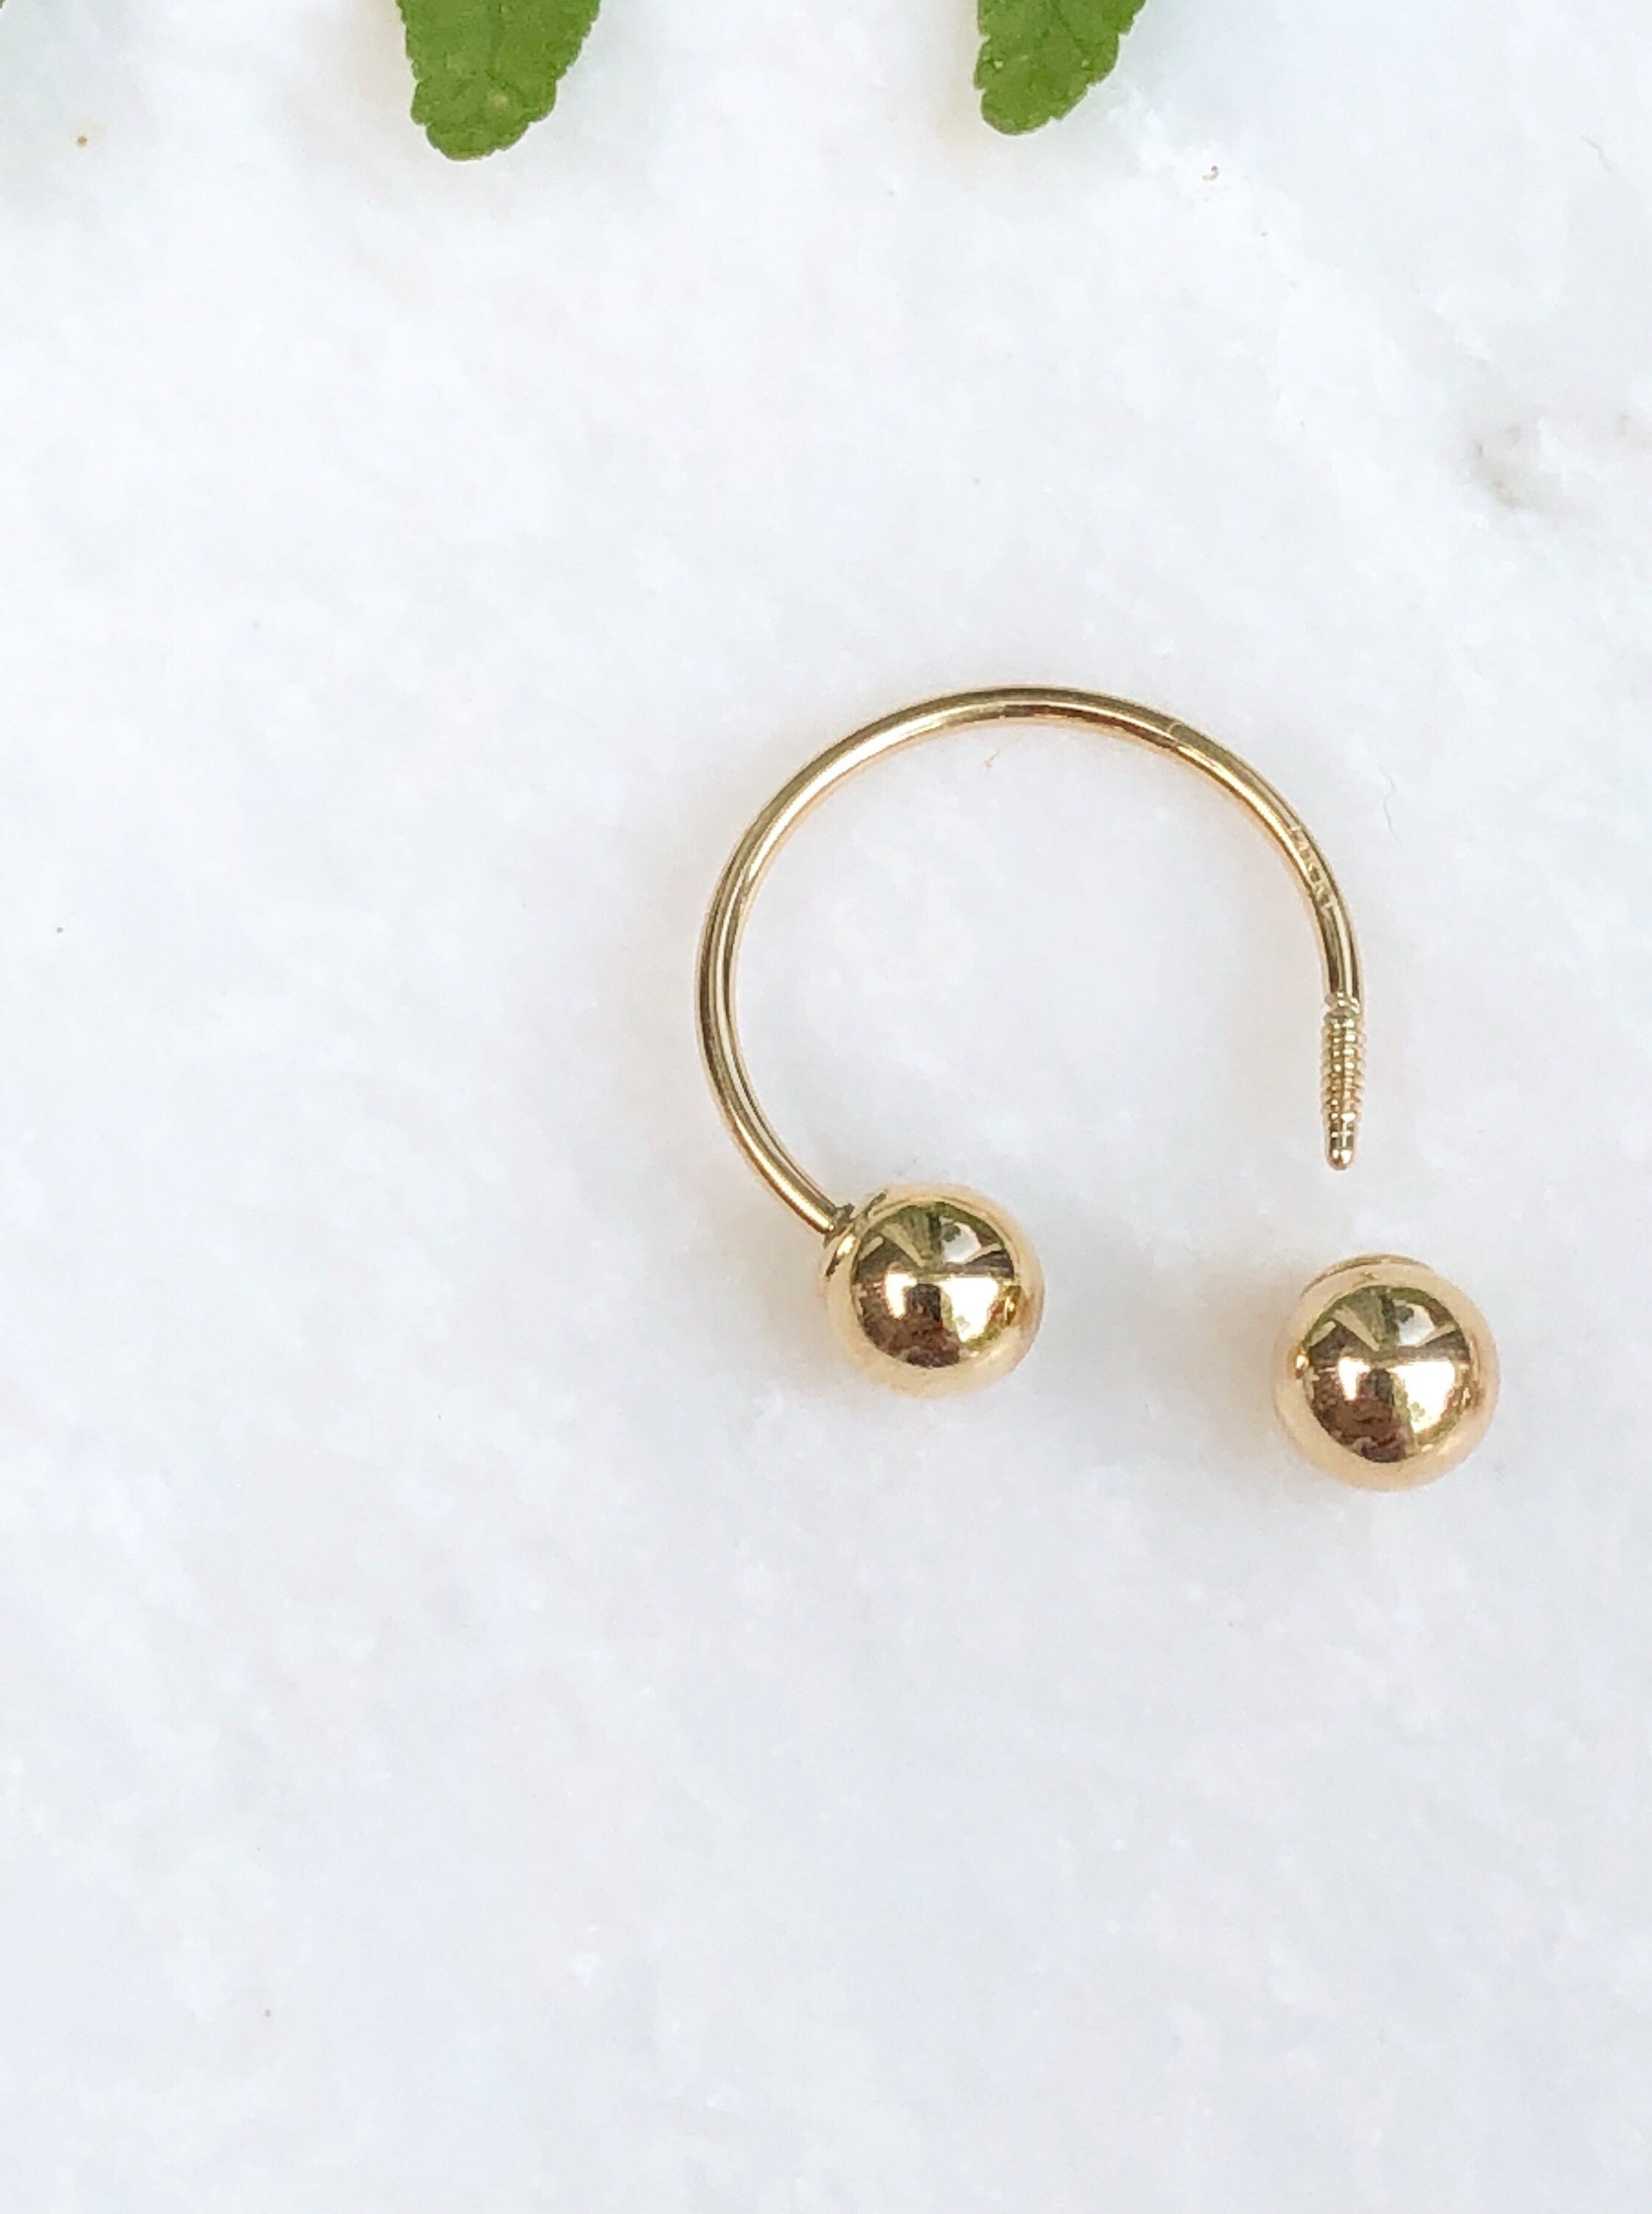 14KT Yellow Gold Earring Shiny Ball Beaded Screw On Half Hoop NEW SINGLE Small Not a Pair